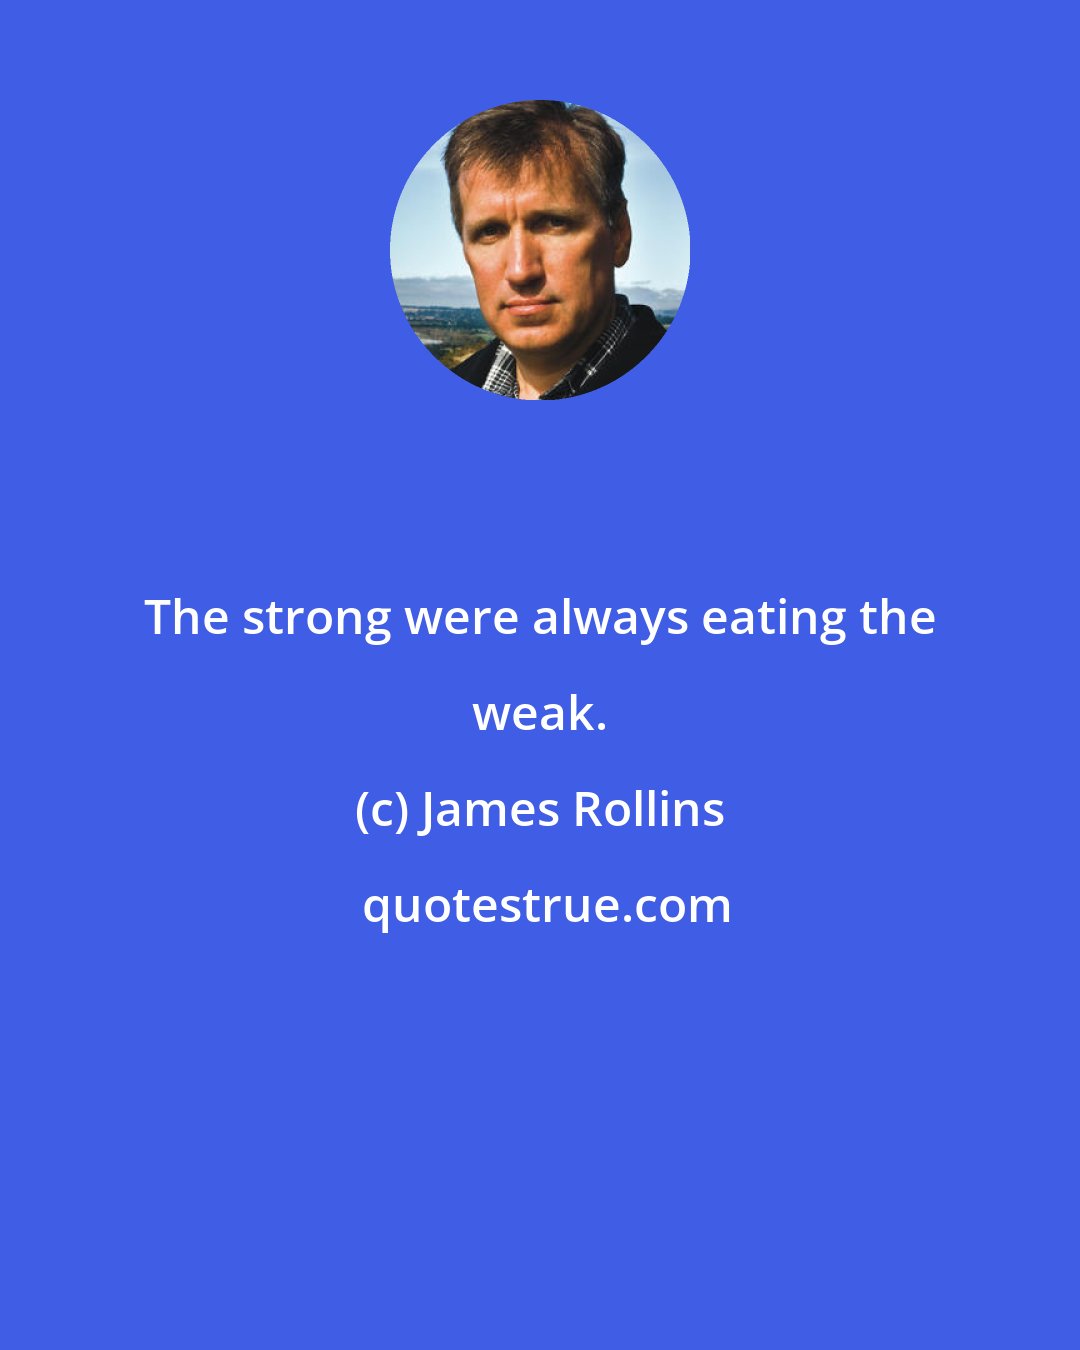 James Rollins: The strong were always eating the weak.